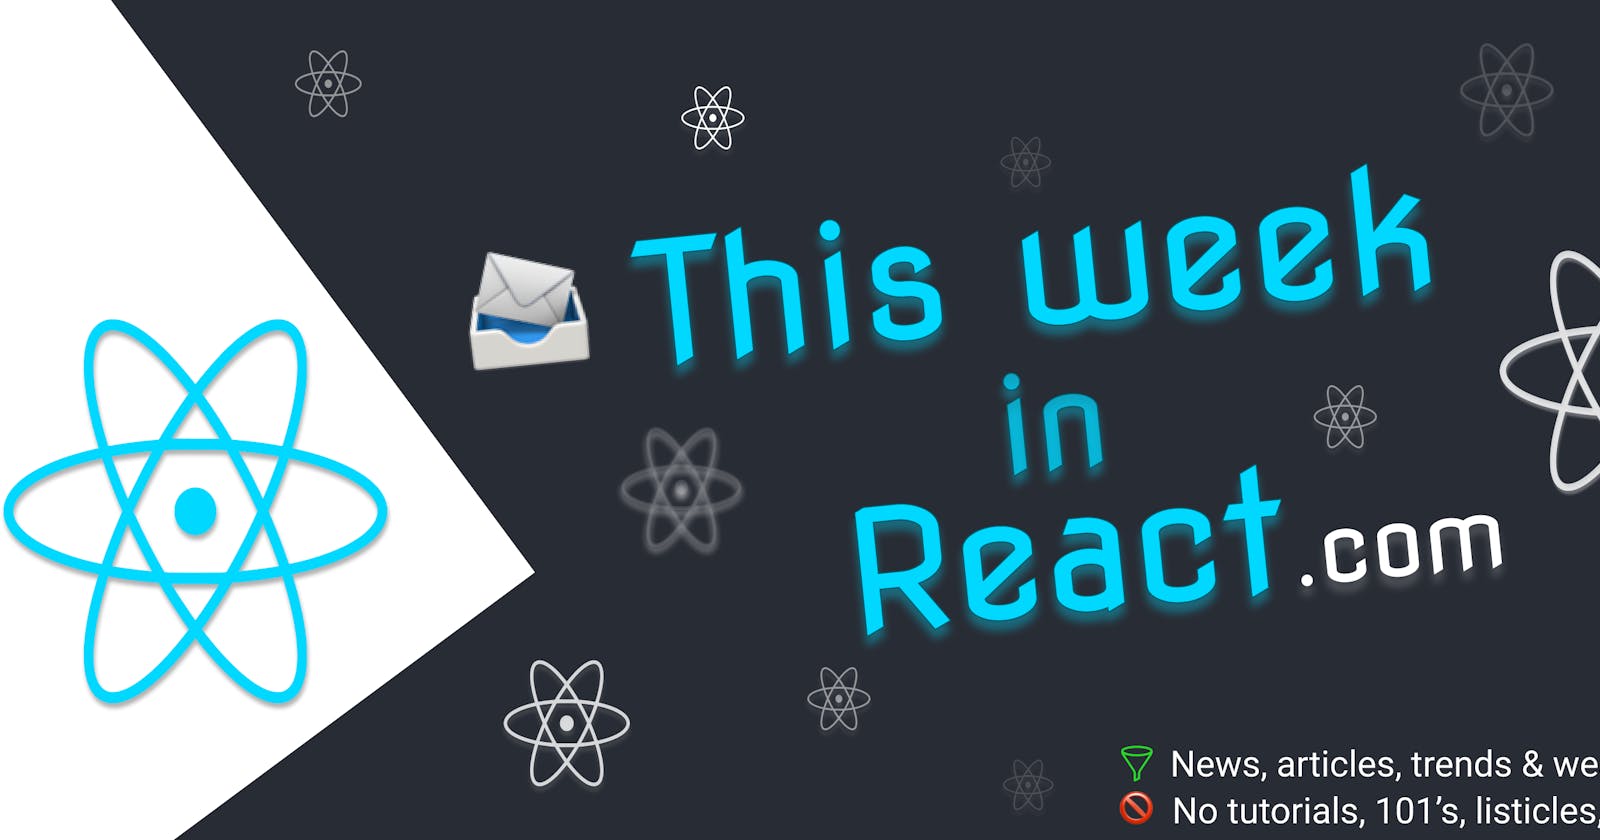 This Week In React #128: SWR, Vite, Codux, Storybook, Next.js, Forget, Nylon, Paper, align-deps, INP, Zod, Tauri...